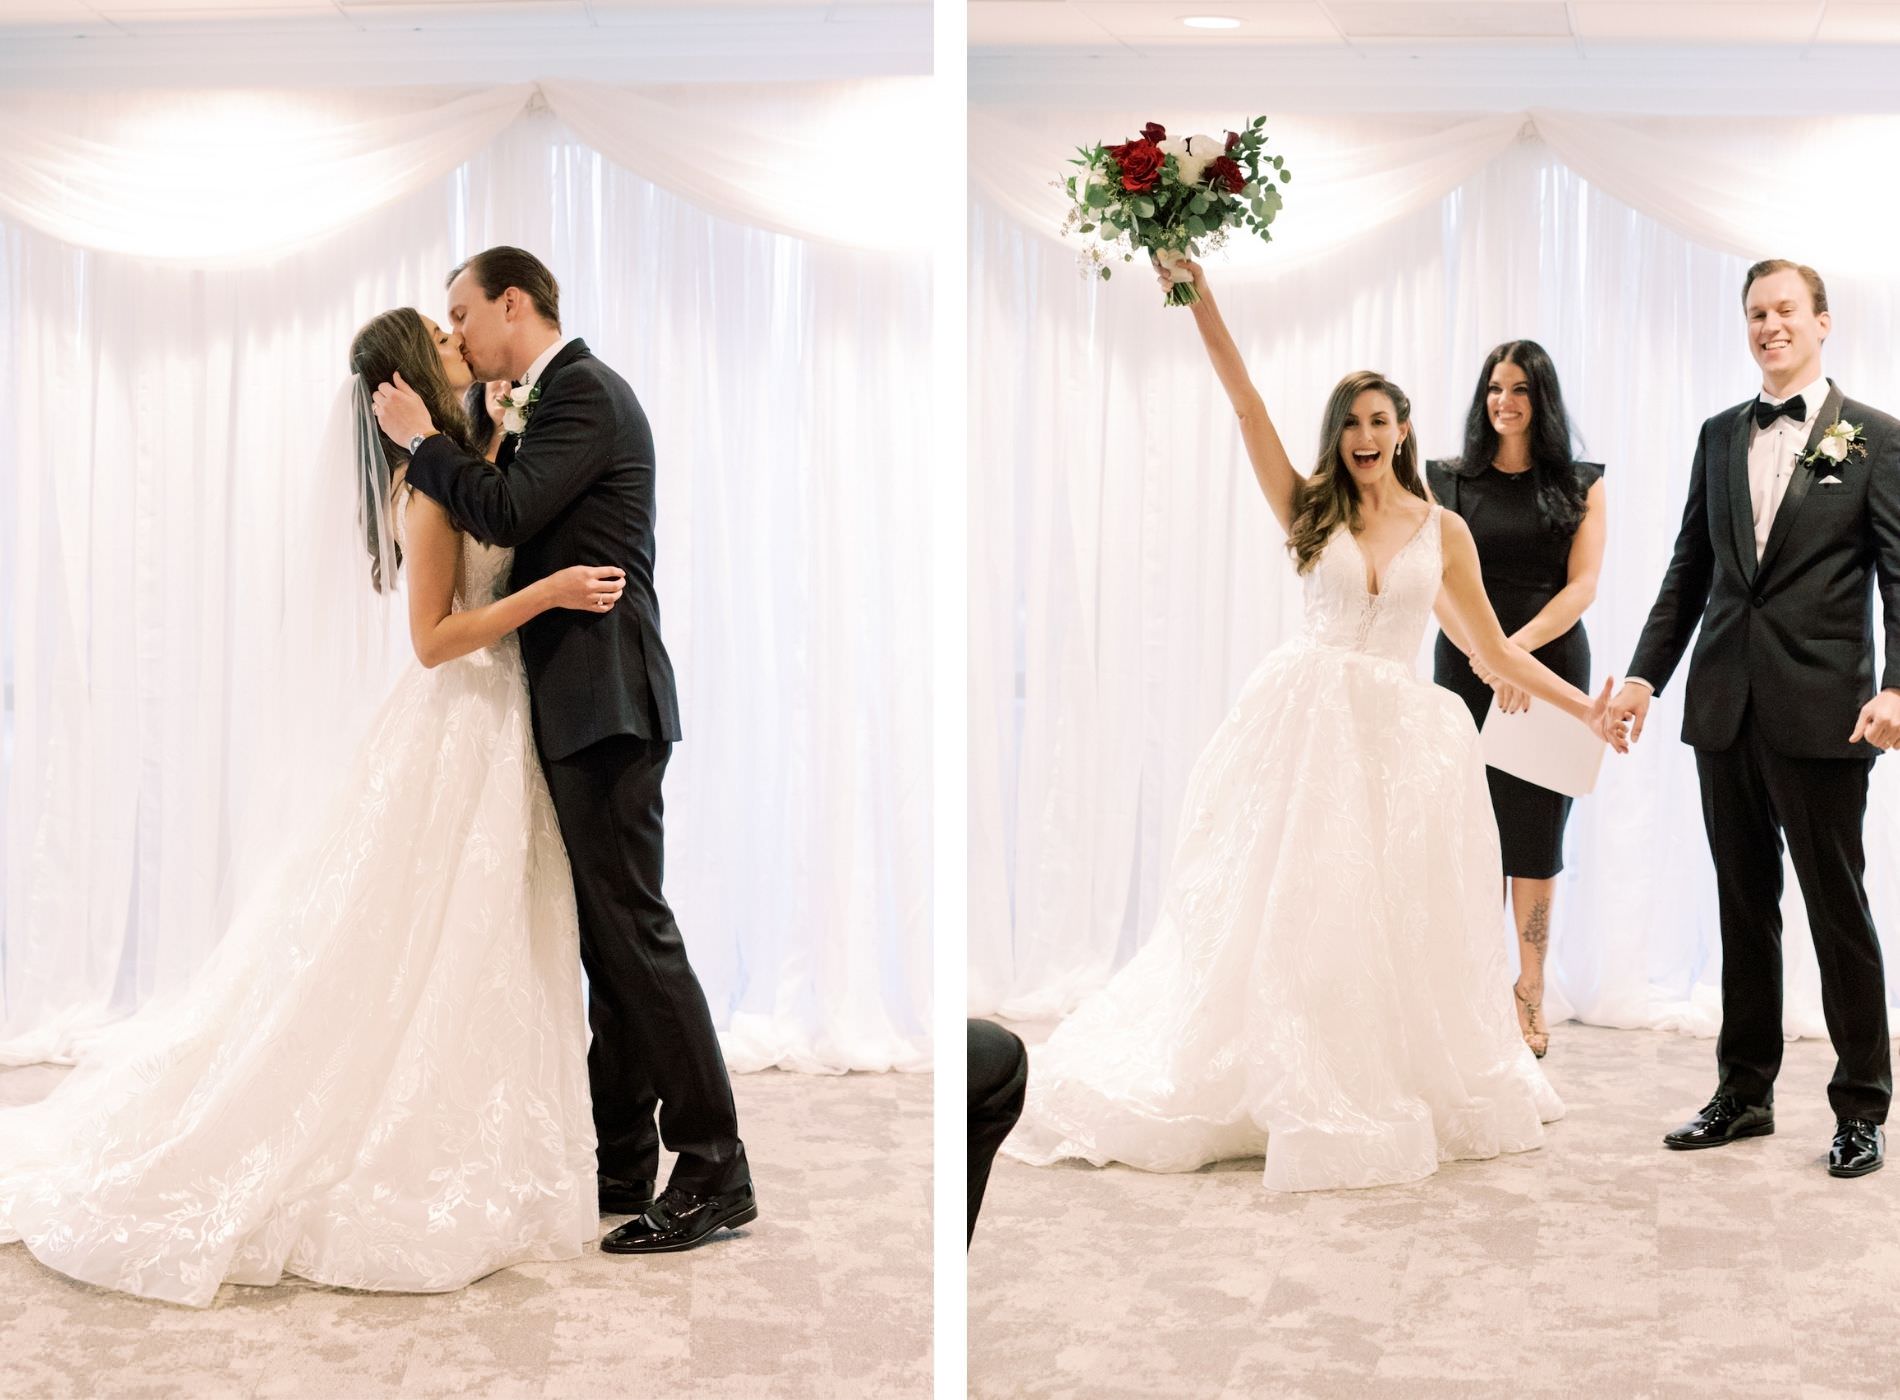 Bride and Groom First Kiss during Indoor Tampa Wedding Ceremony at Downtown Tampa Wedding Venue The Tampa Club | Pipe and Drape Ceremony Backdrop | V Neck Embroidered Illusion Panel Allure Couture Designer Wedding Dress Bridal Gown | Groom in Classic Black Suit Tux with Bow Tie